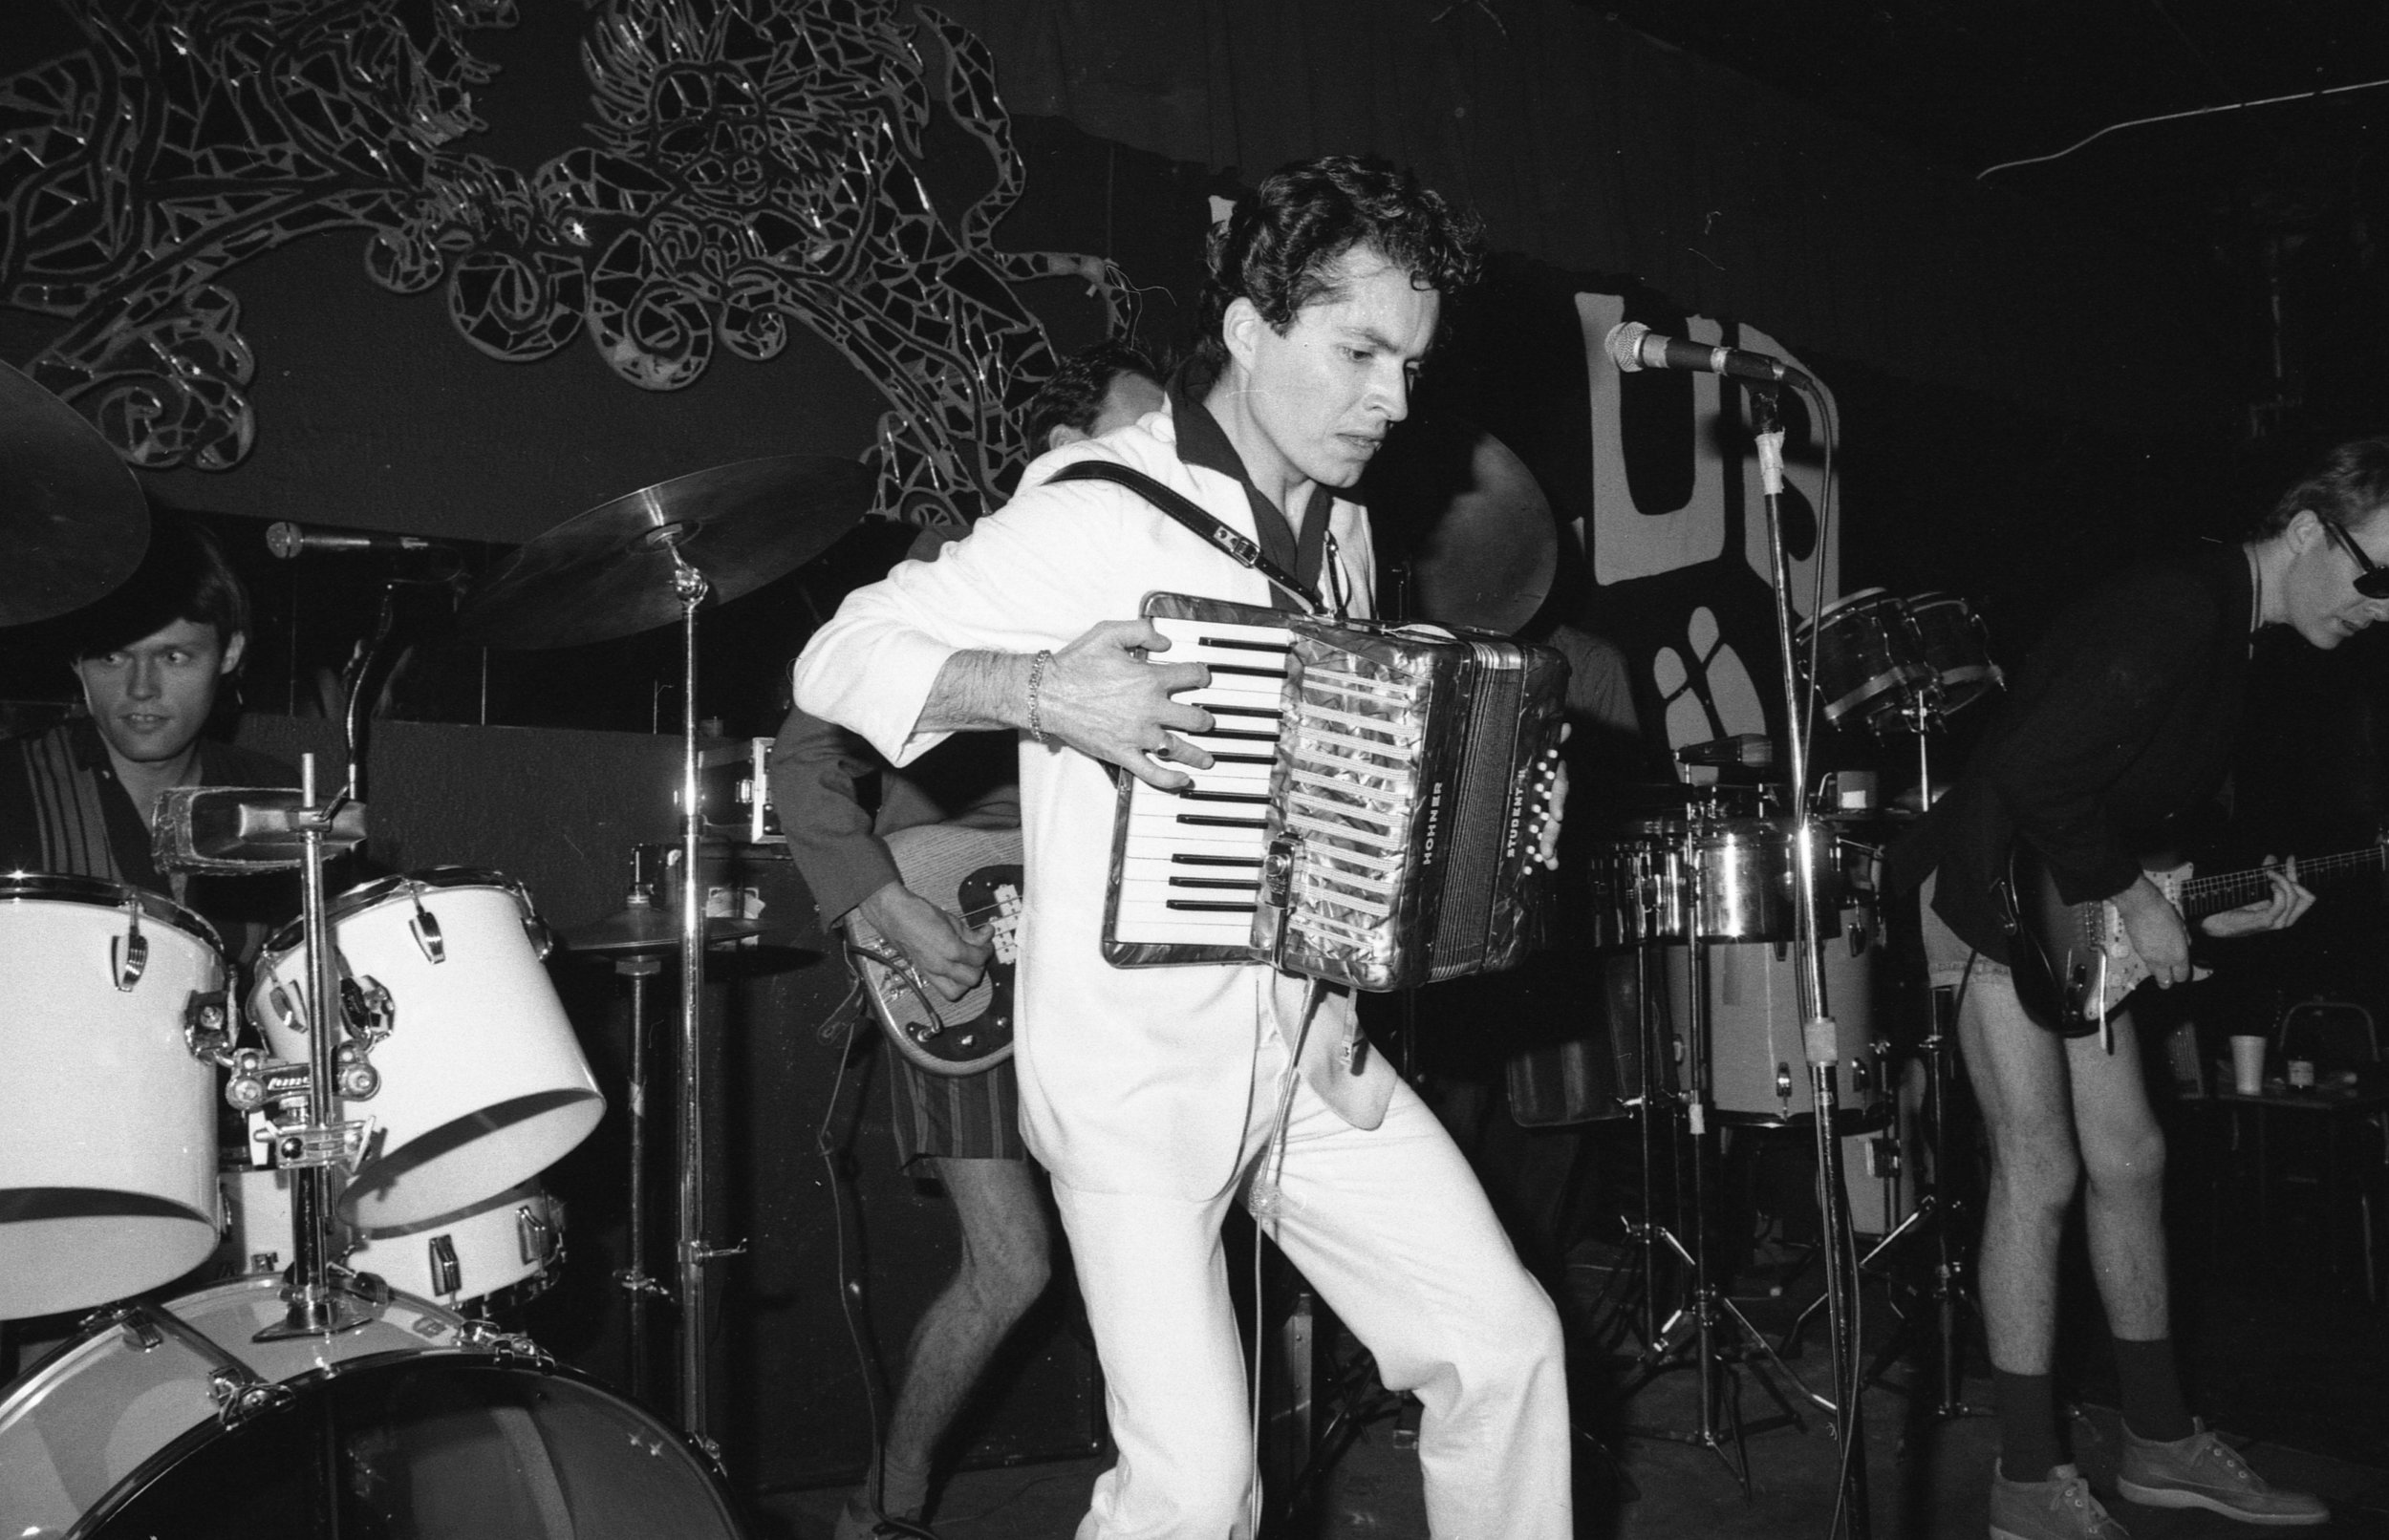 Billy Sheets and Undercover at the On Klub, Los Angeles, 1981.